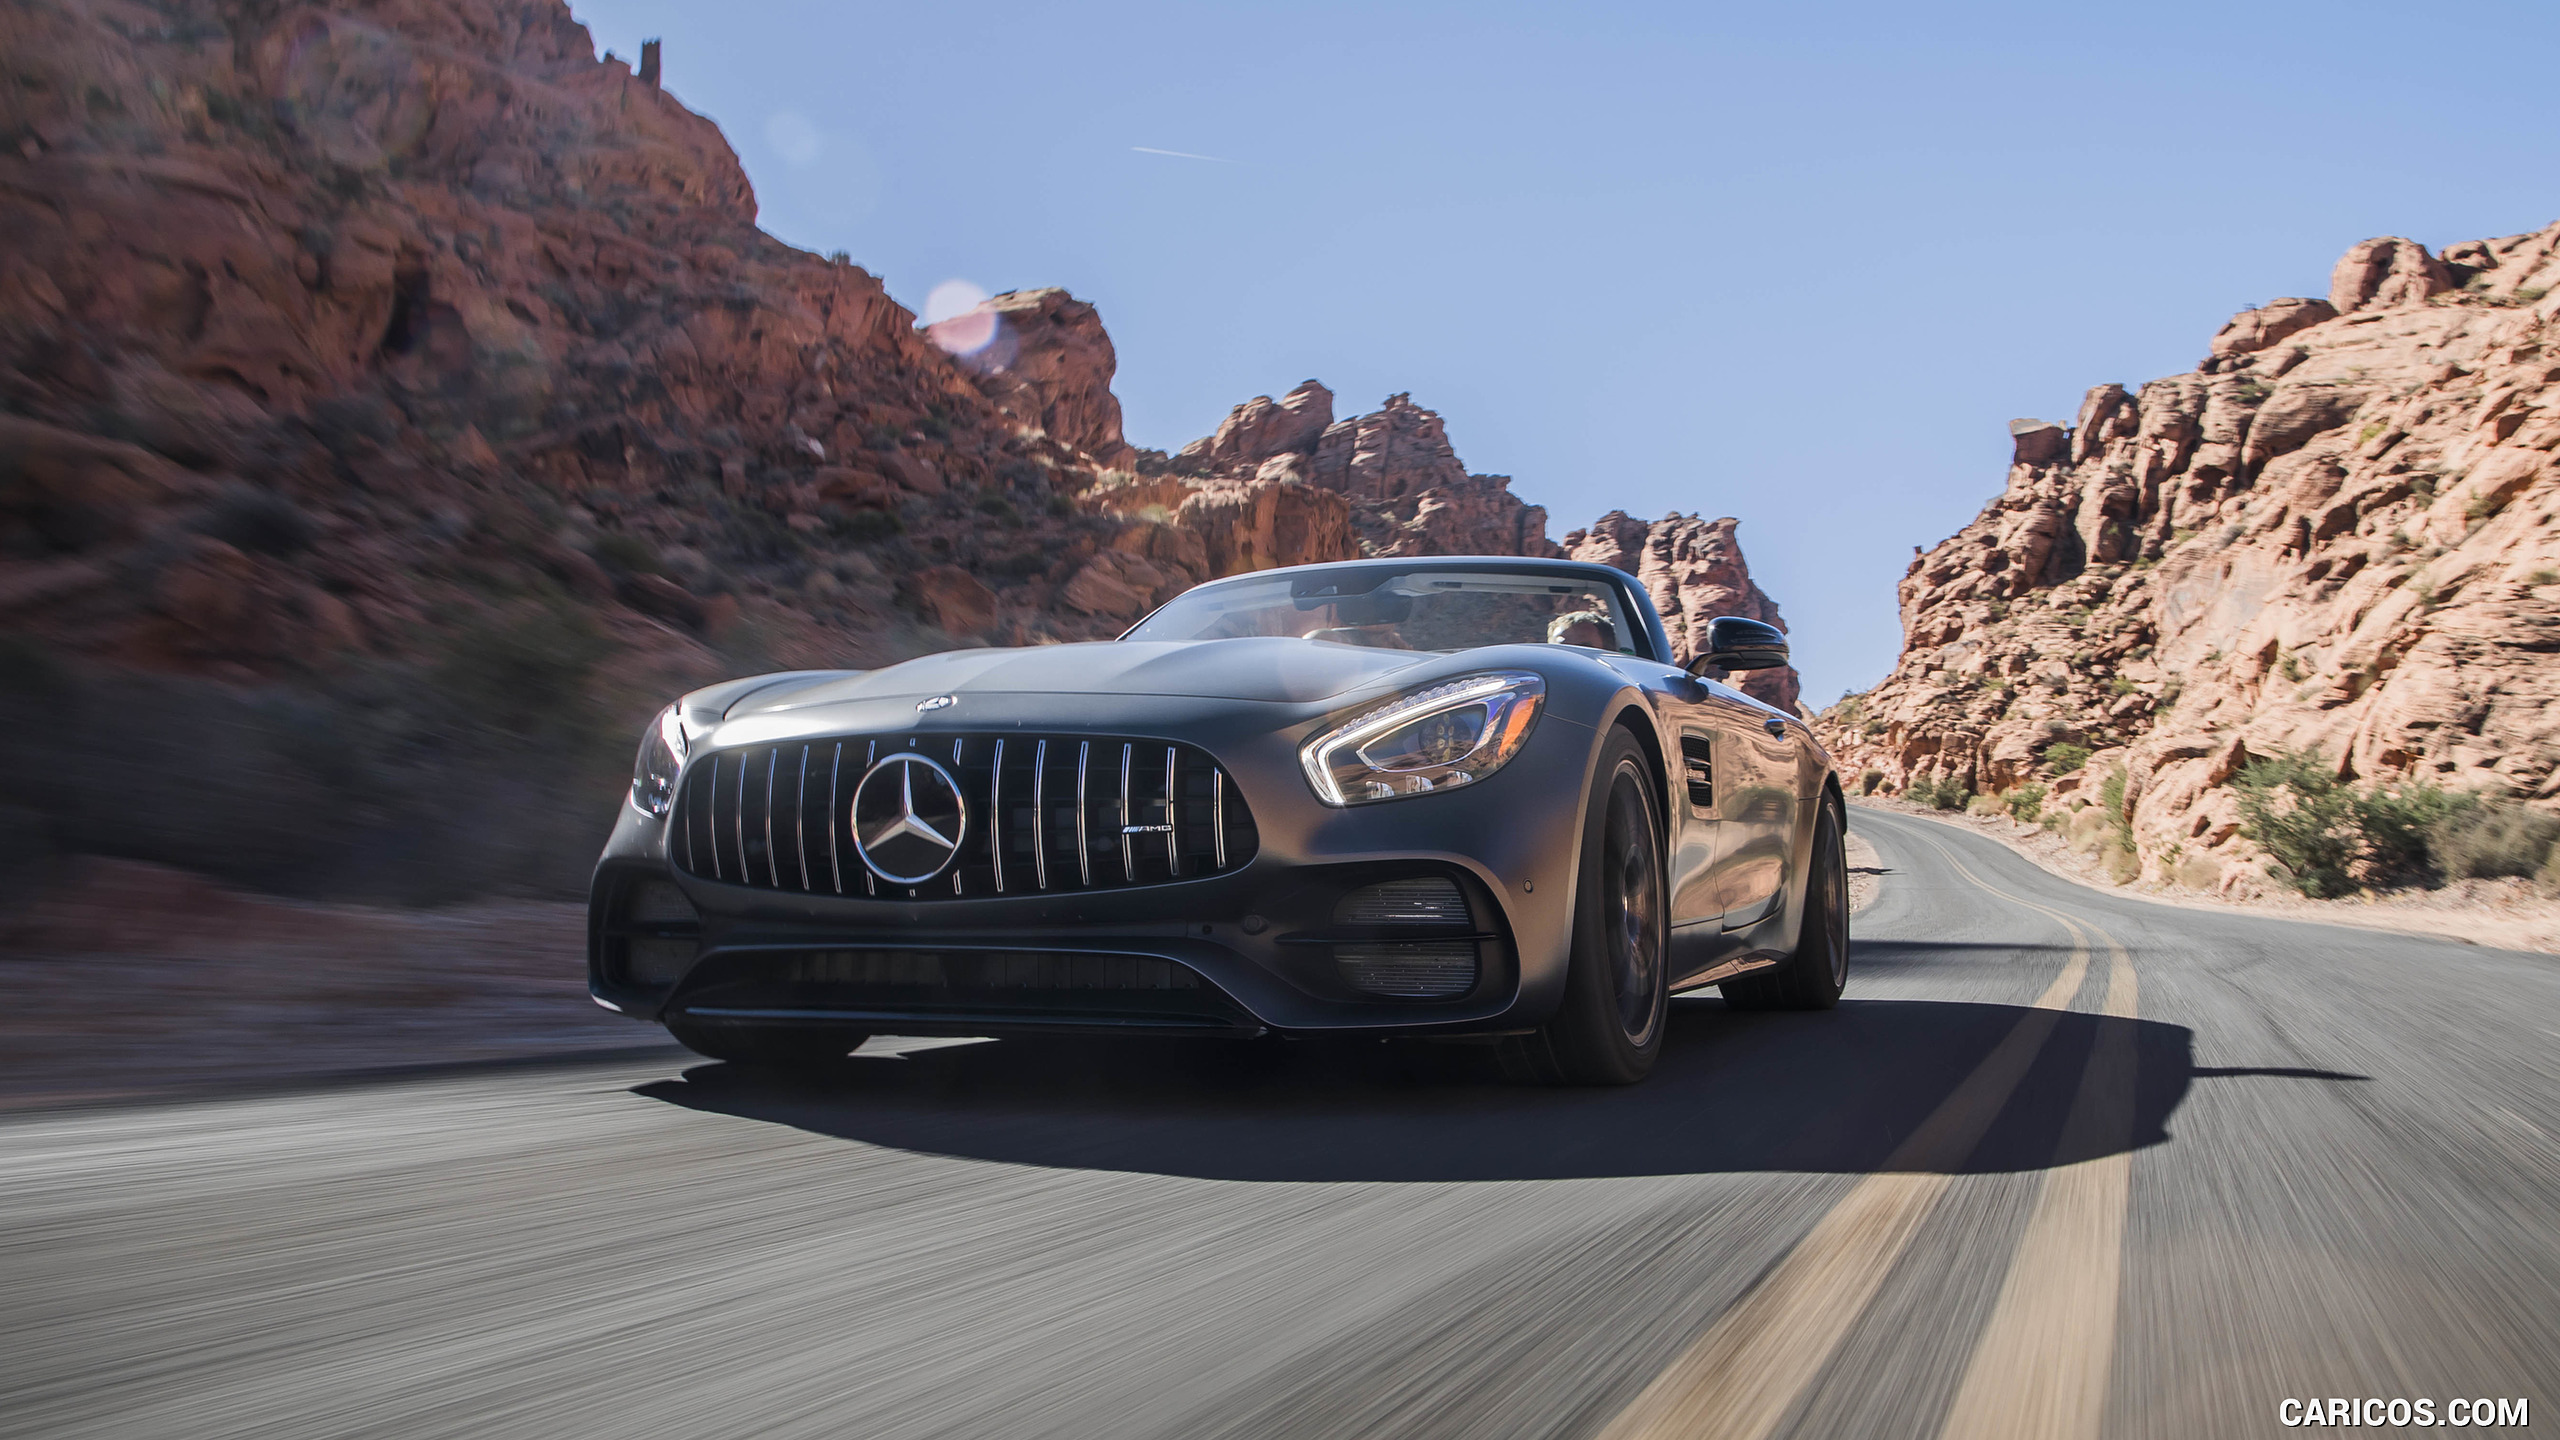 2018 Mercedes-AMG GT C Roadster - Front Three-Quarter, #48 of 350